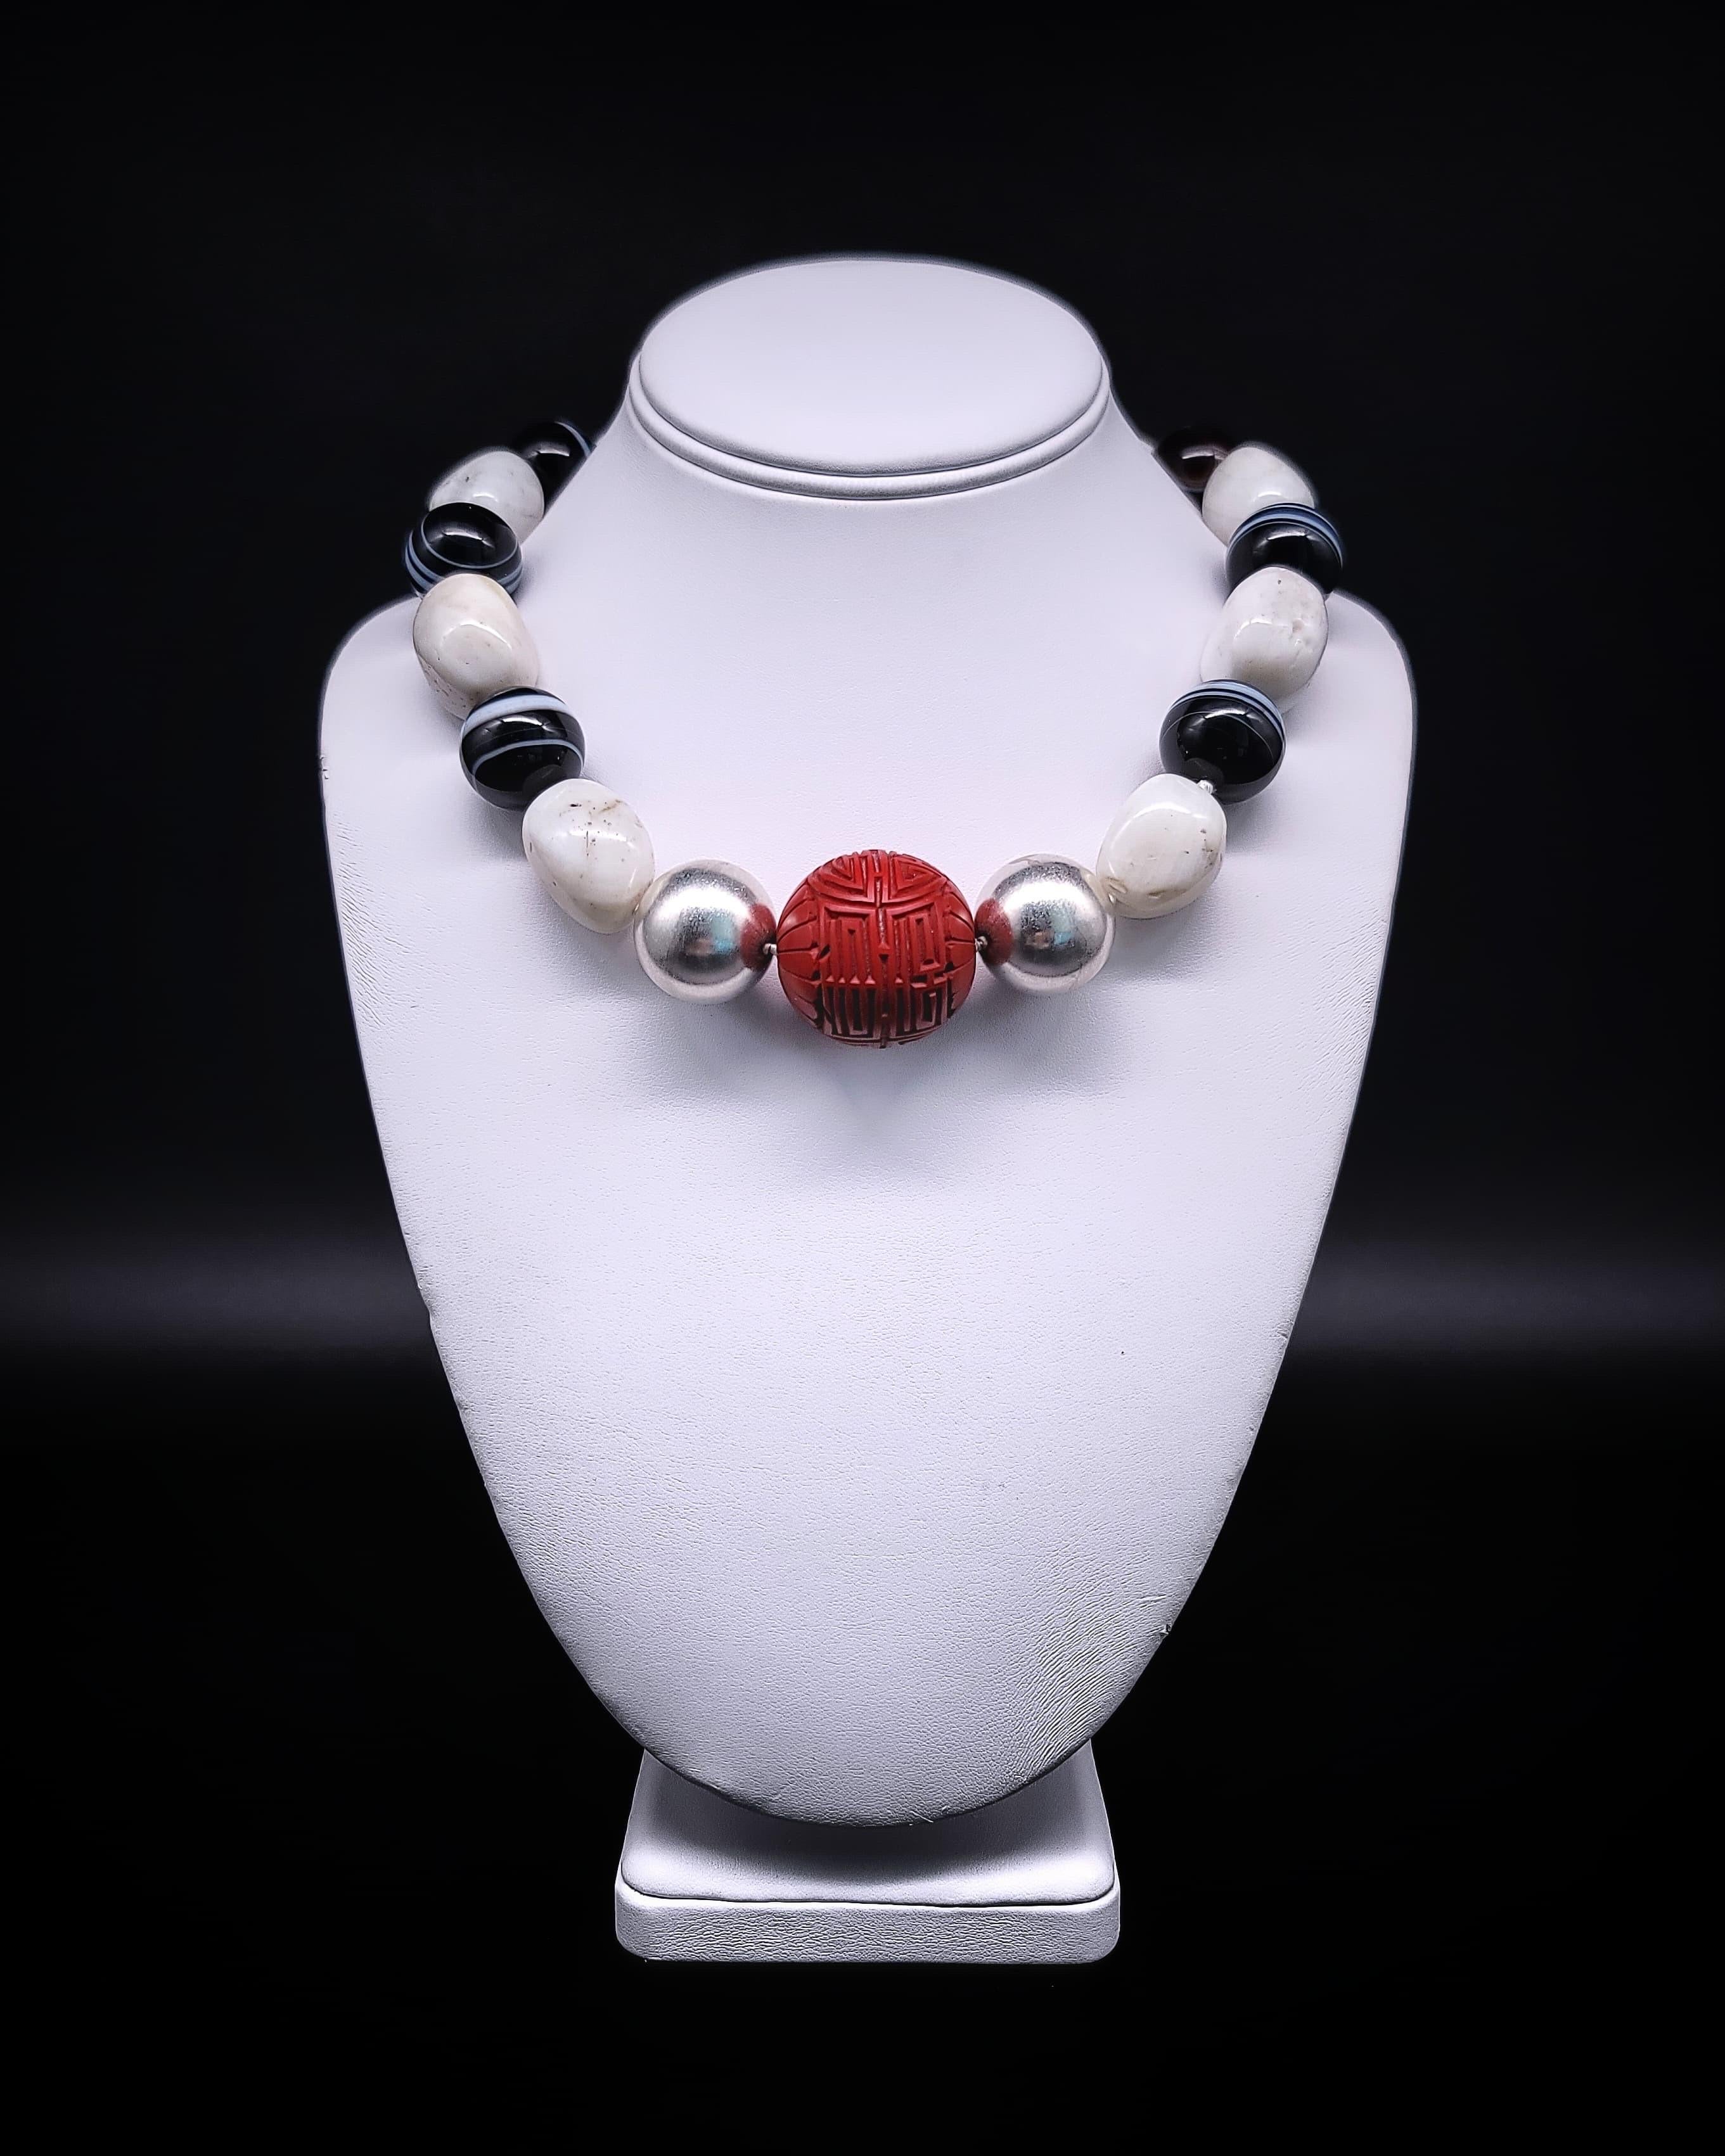 One-of-a-Kind

A strikingly bold necklace of alternating large white oval agate beads with more black than white 18mm polished sardonyx beads creates a mesmerizing pattern. Calling to the center of attention is a pair of 20mm sterling silver balls